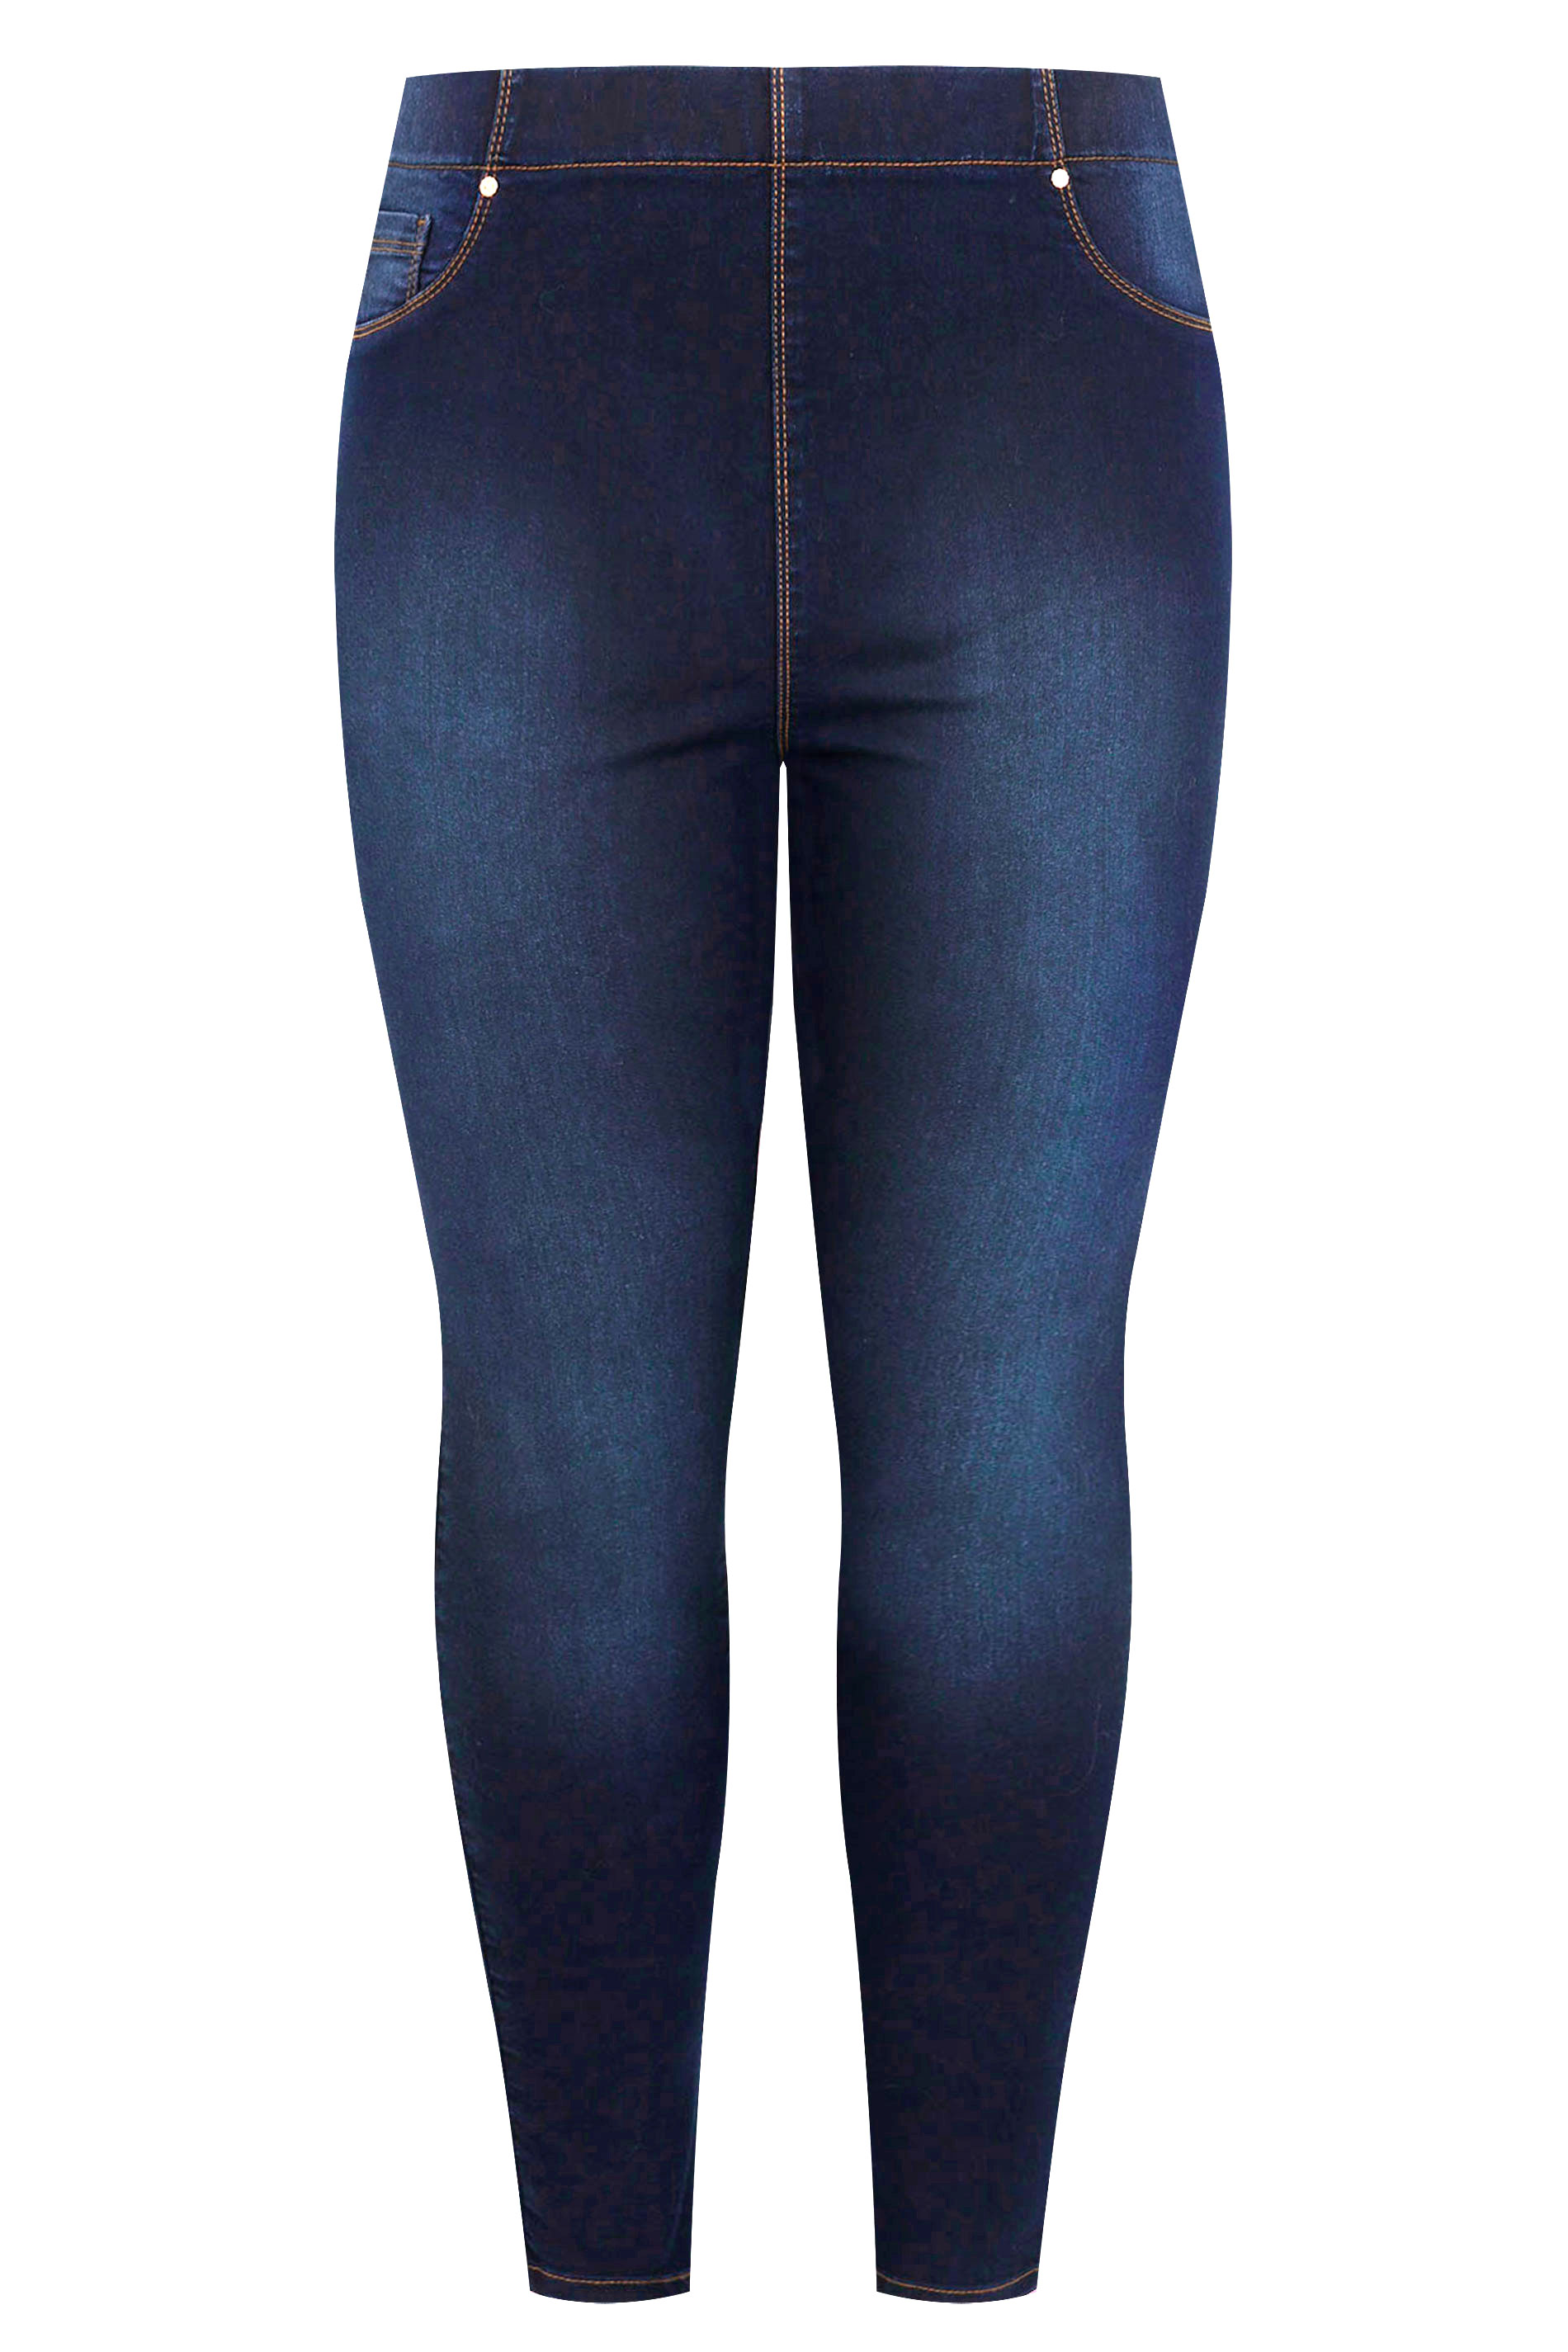 Calzedonia Women's Total Shaper Jeggings, S, Blue: Buy Online at Best Price  in UAE 